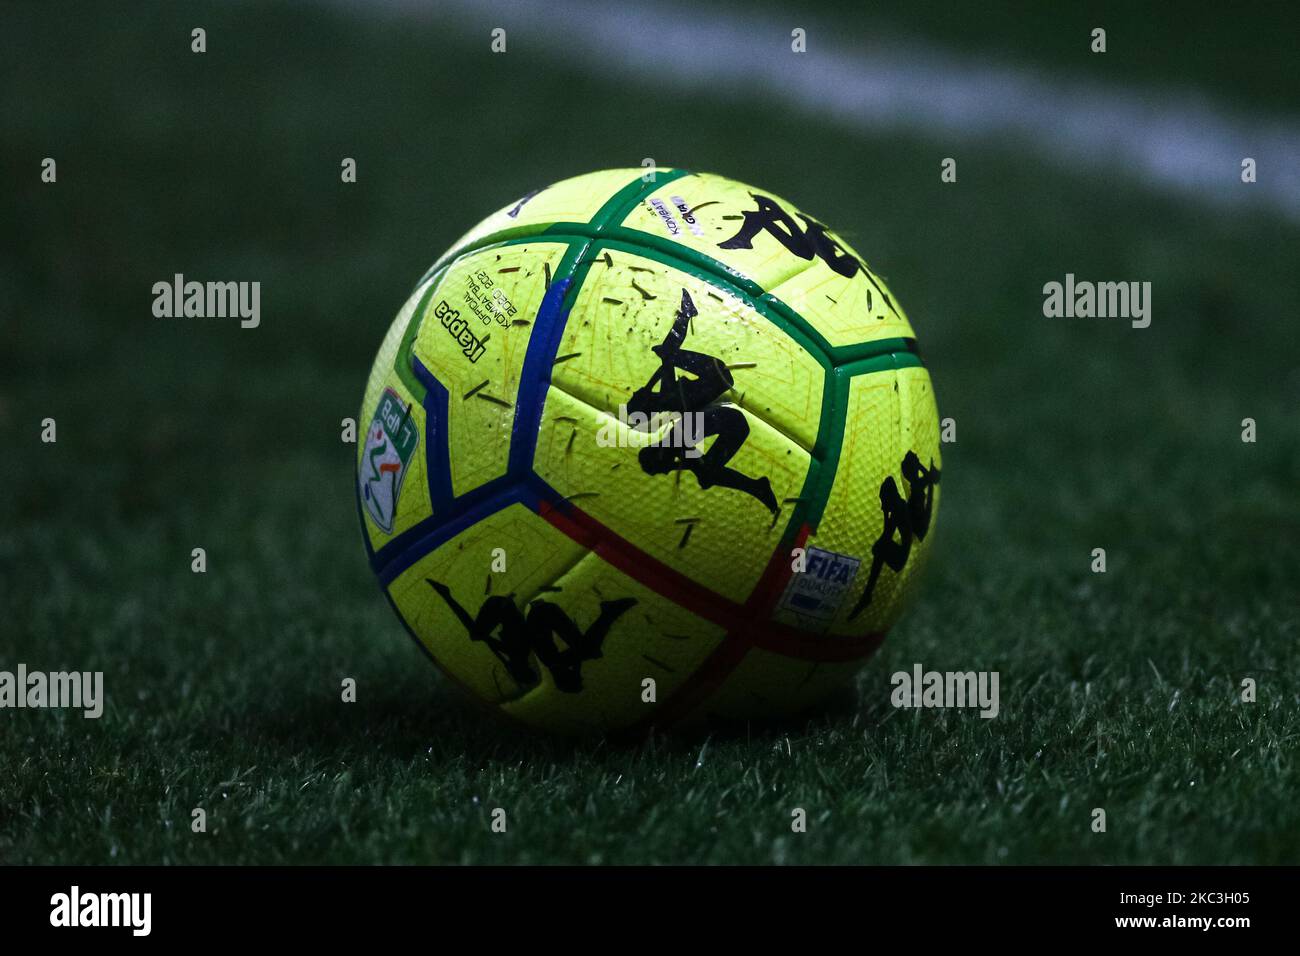 Serie b league hi-res stock photography and images - Alamy